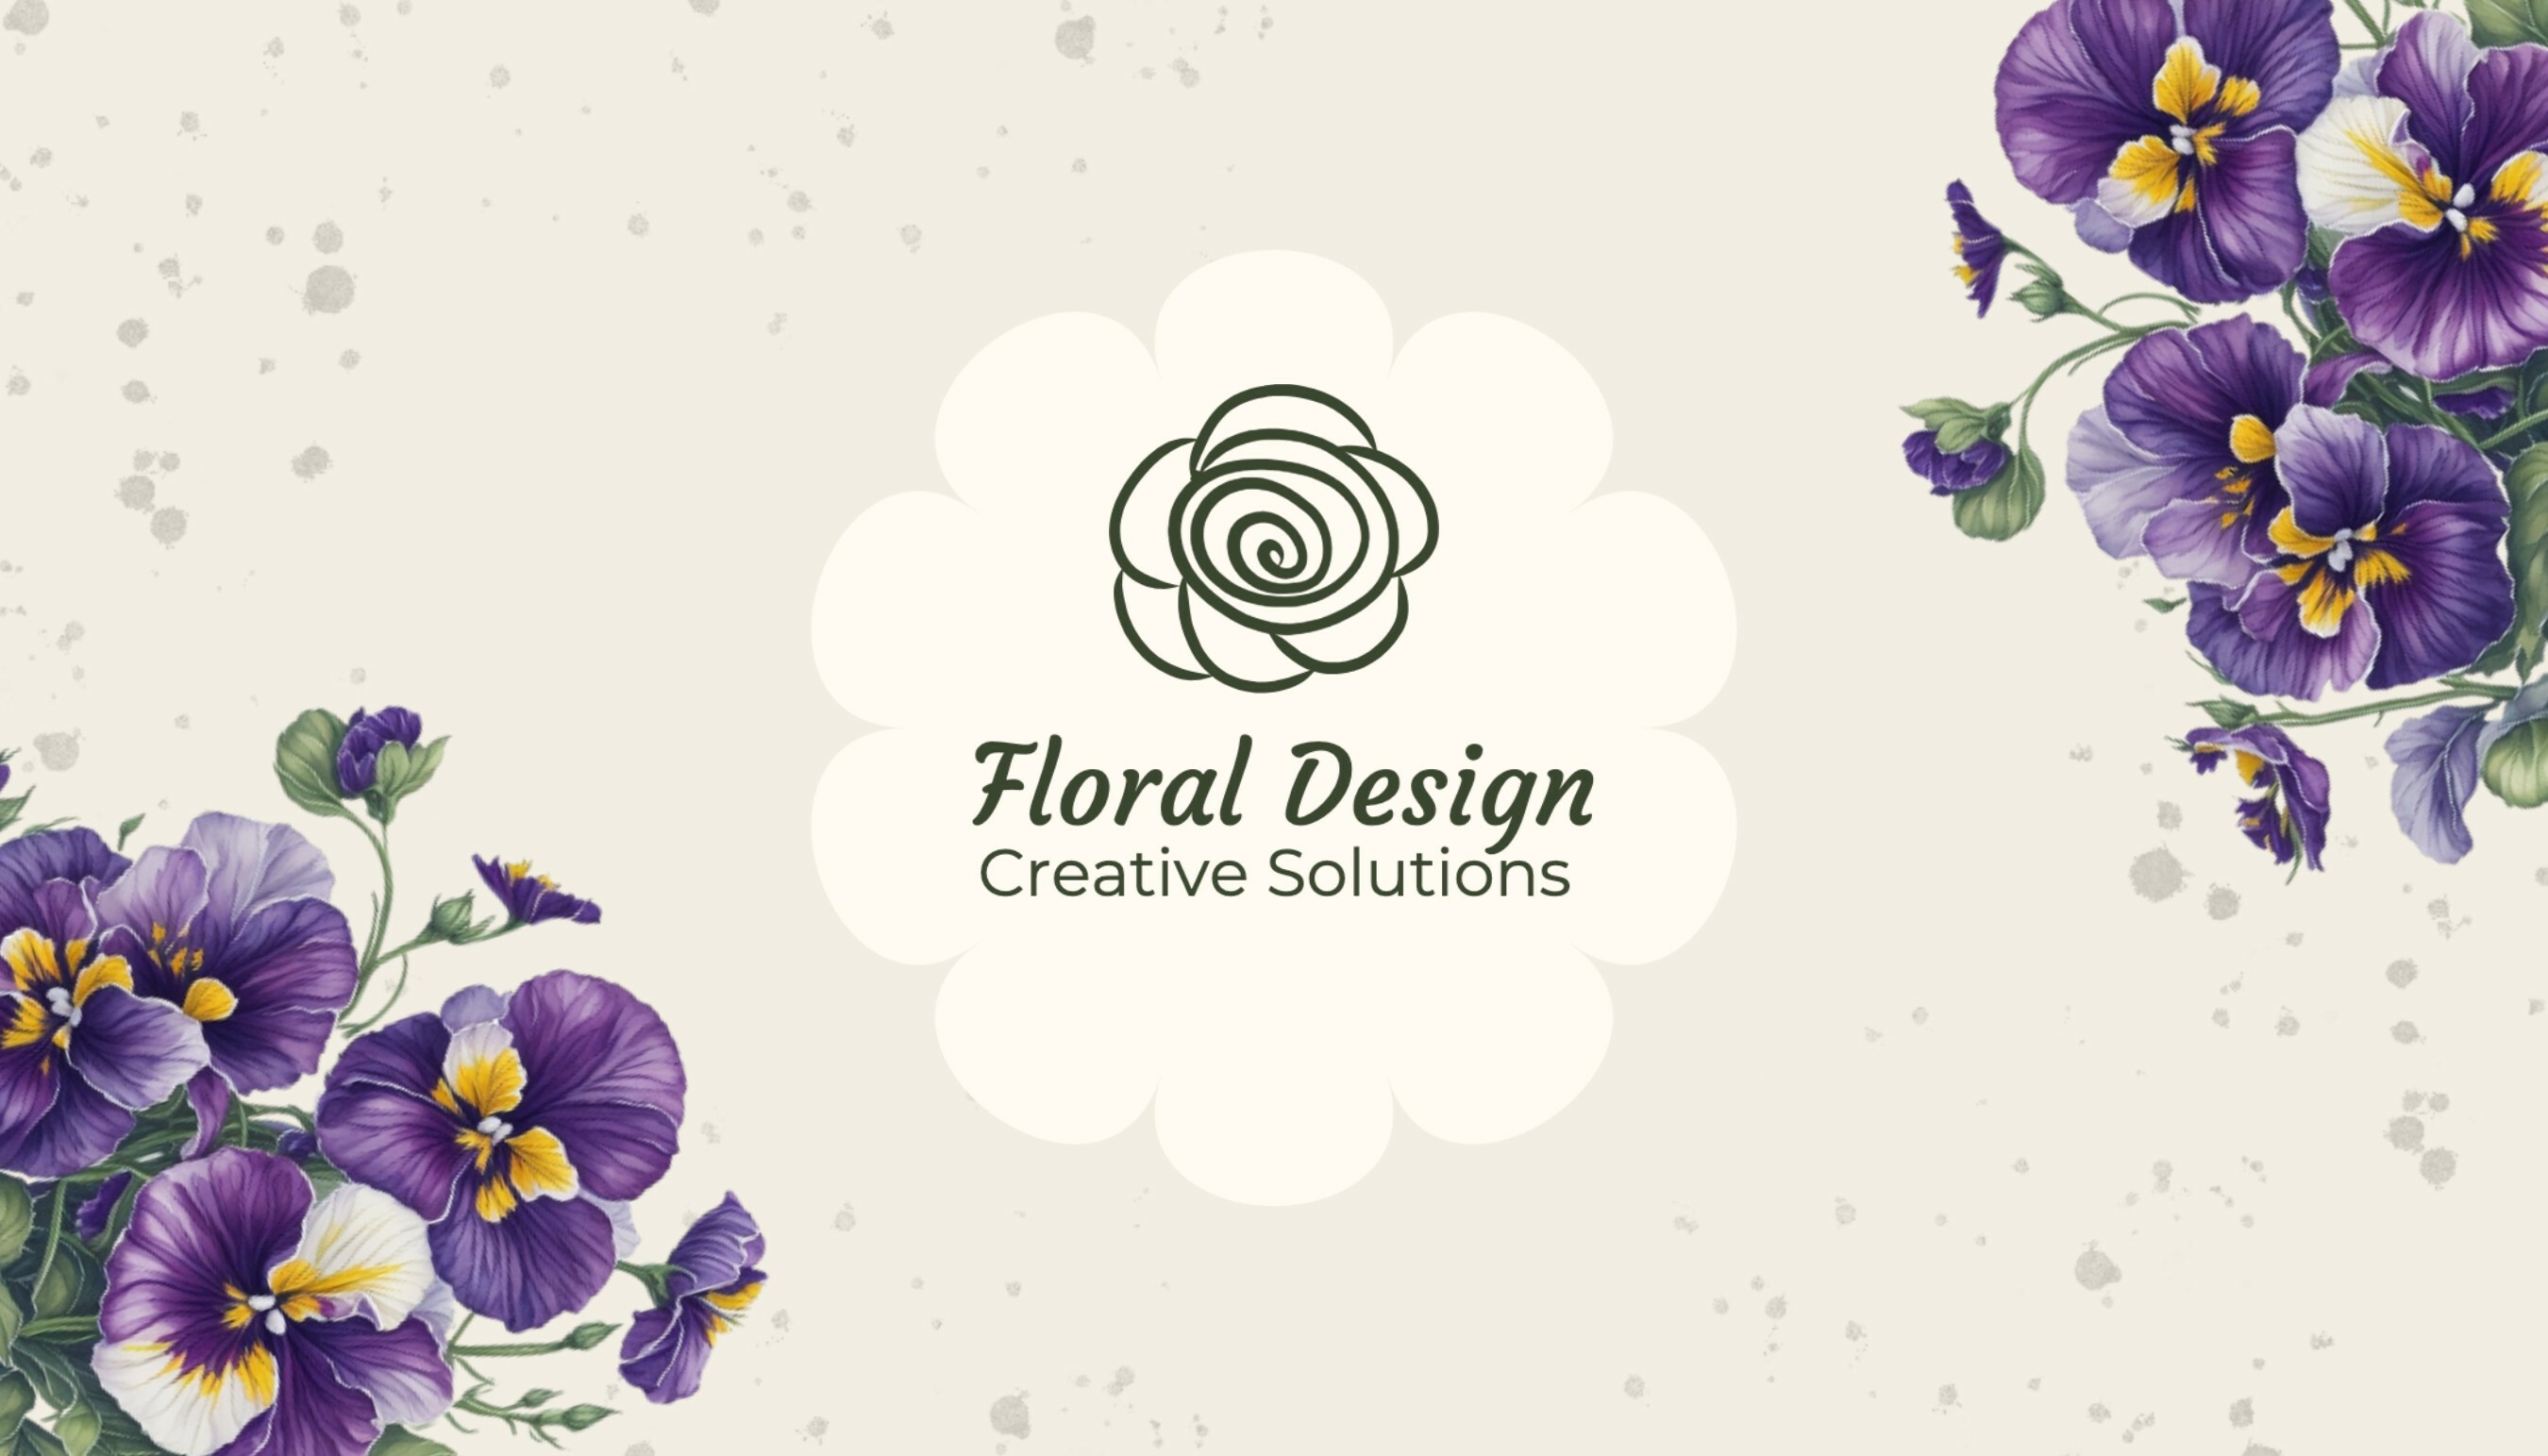 Floral Design Creative Solutions Business Card